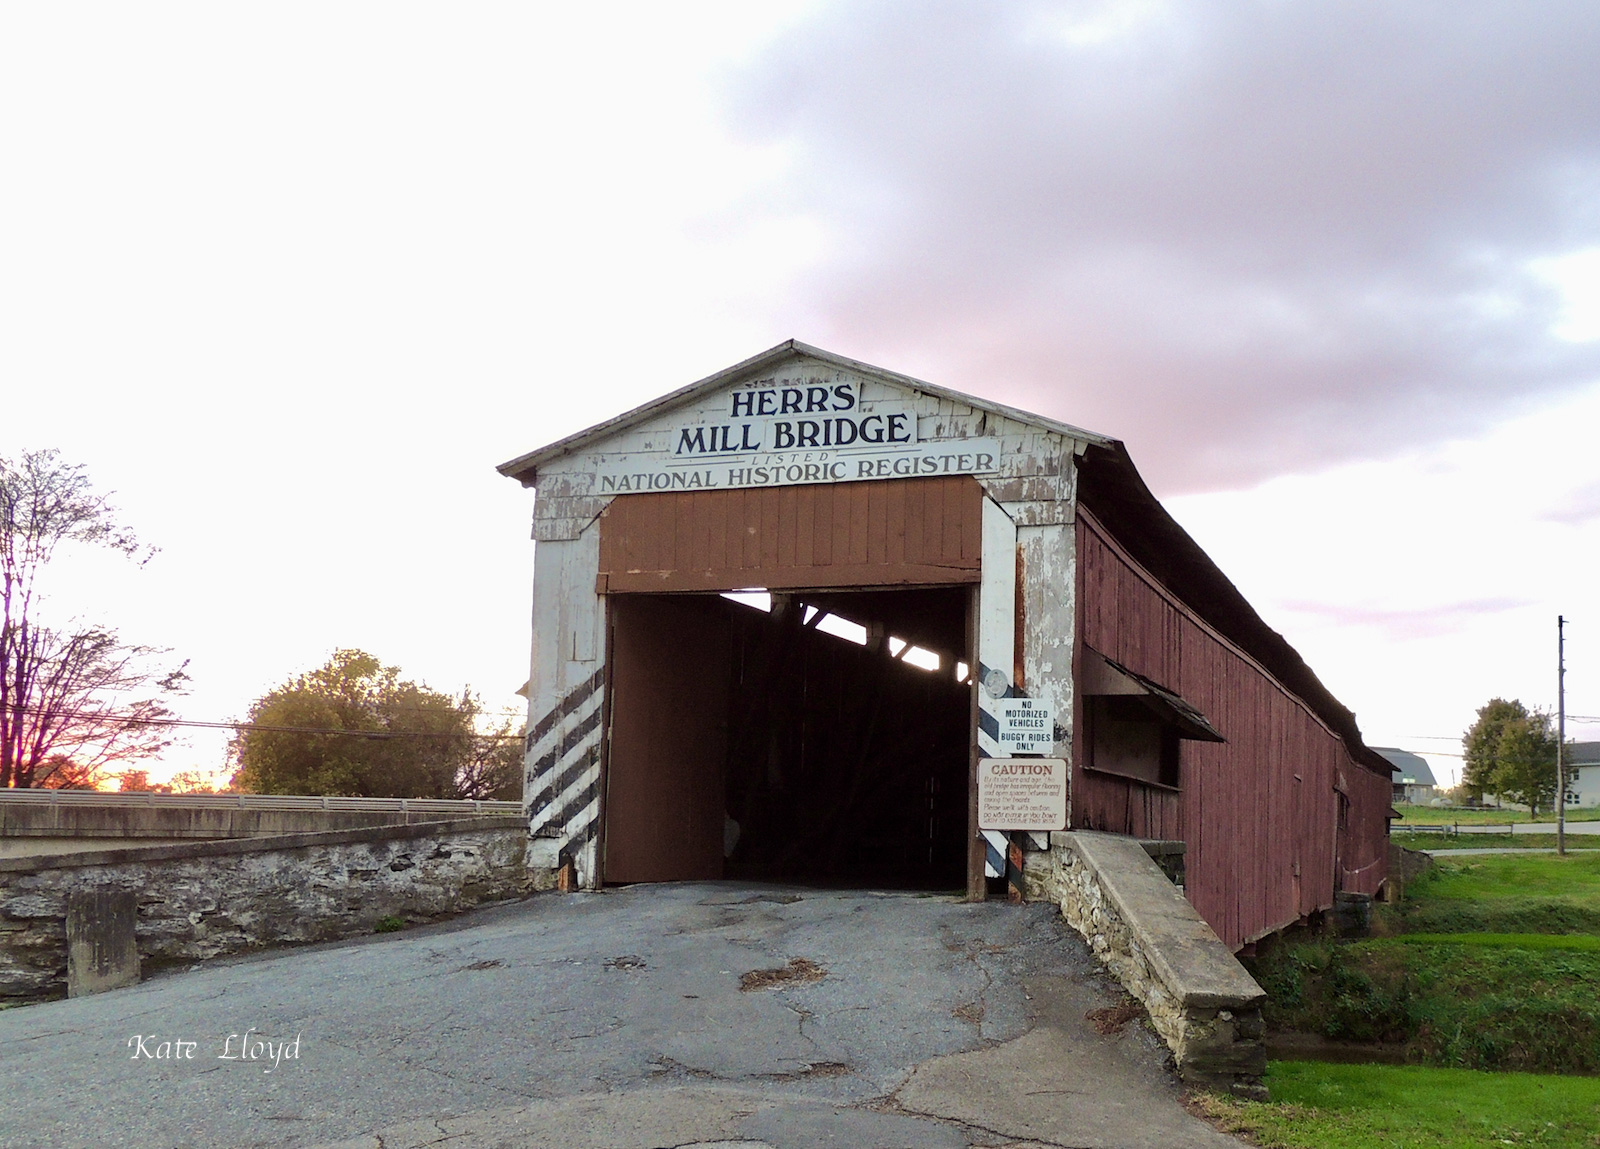 I love the covered bridges of Lancaster County!